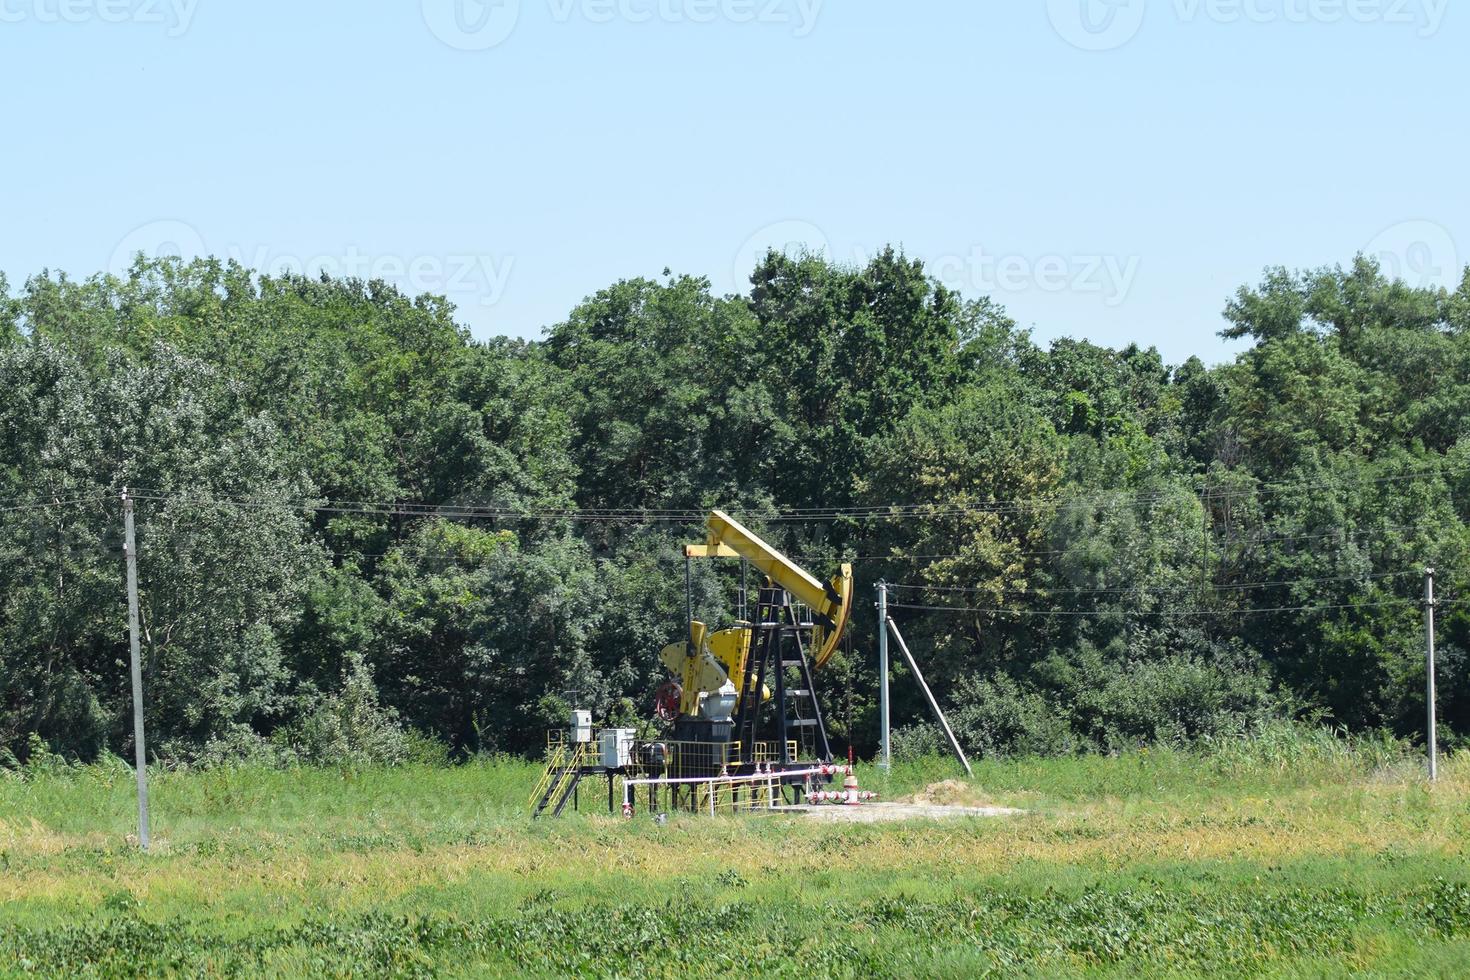 Pumping unit as the oil pump installed on a well photo